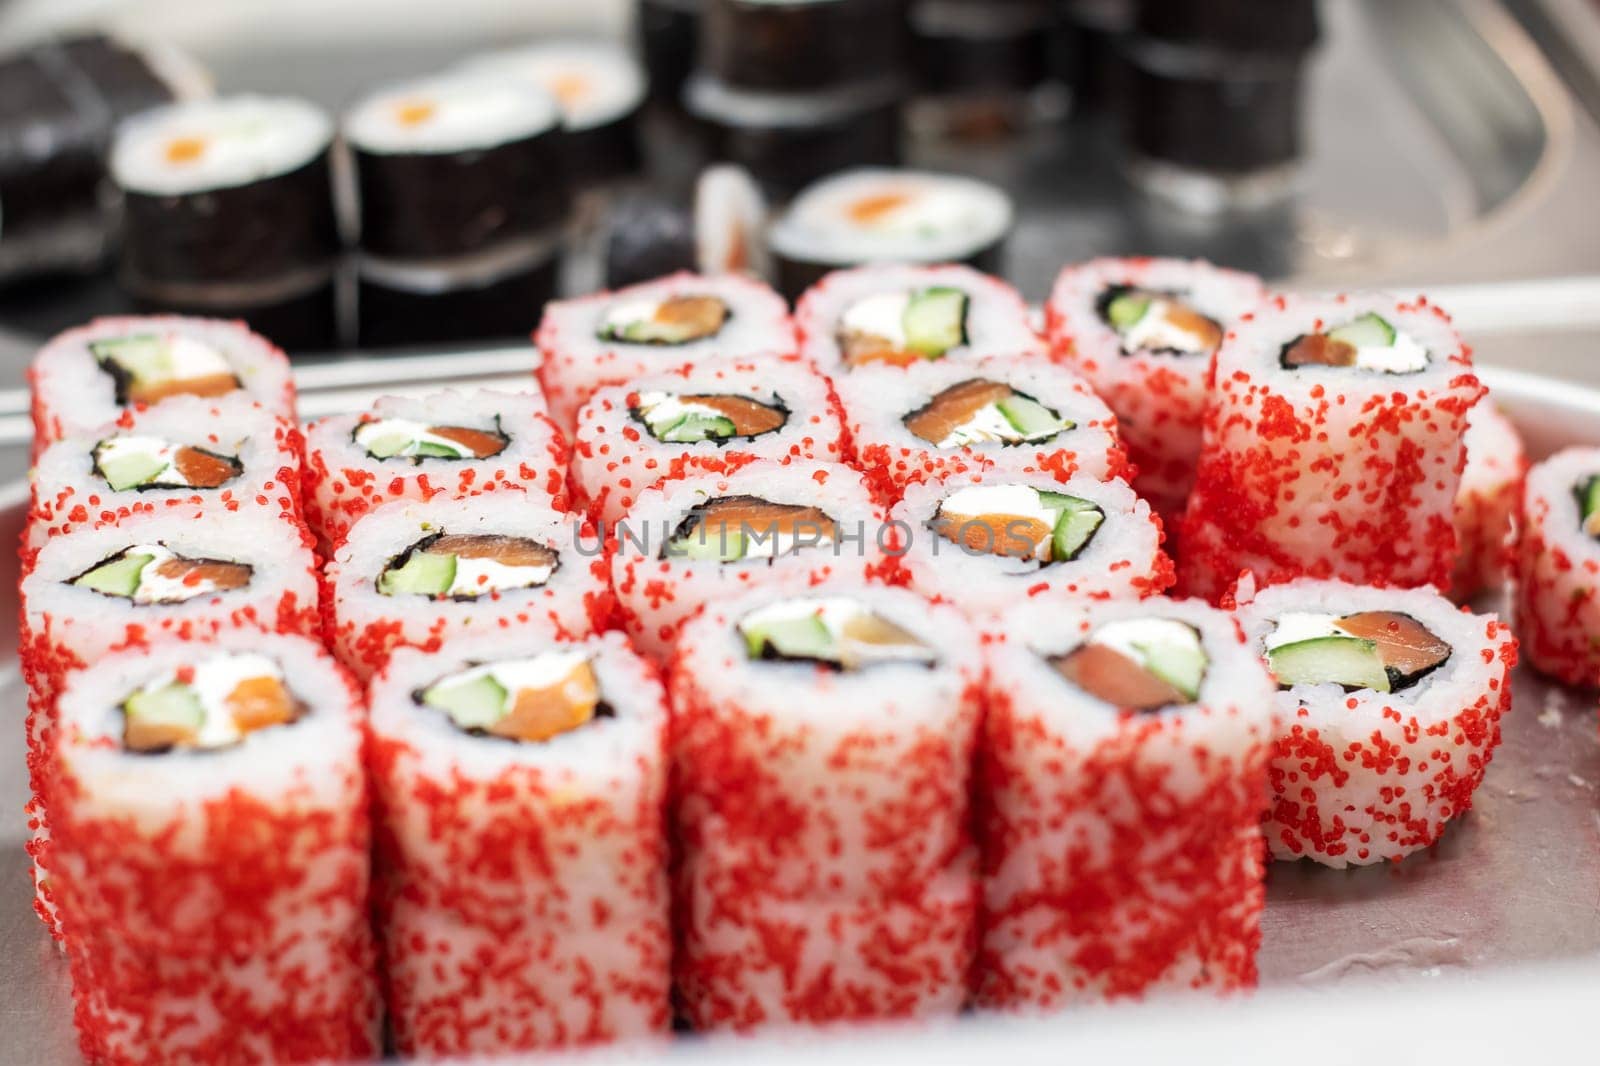 Sushi rolls with red sprinkles, a delicious dish with a twist by Vera1703